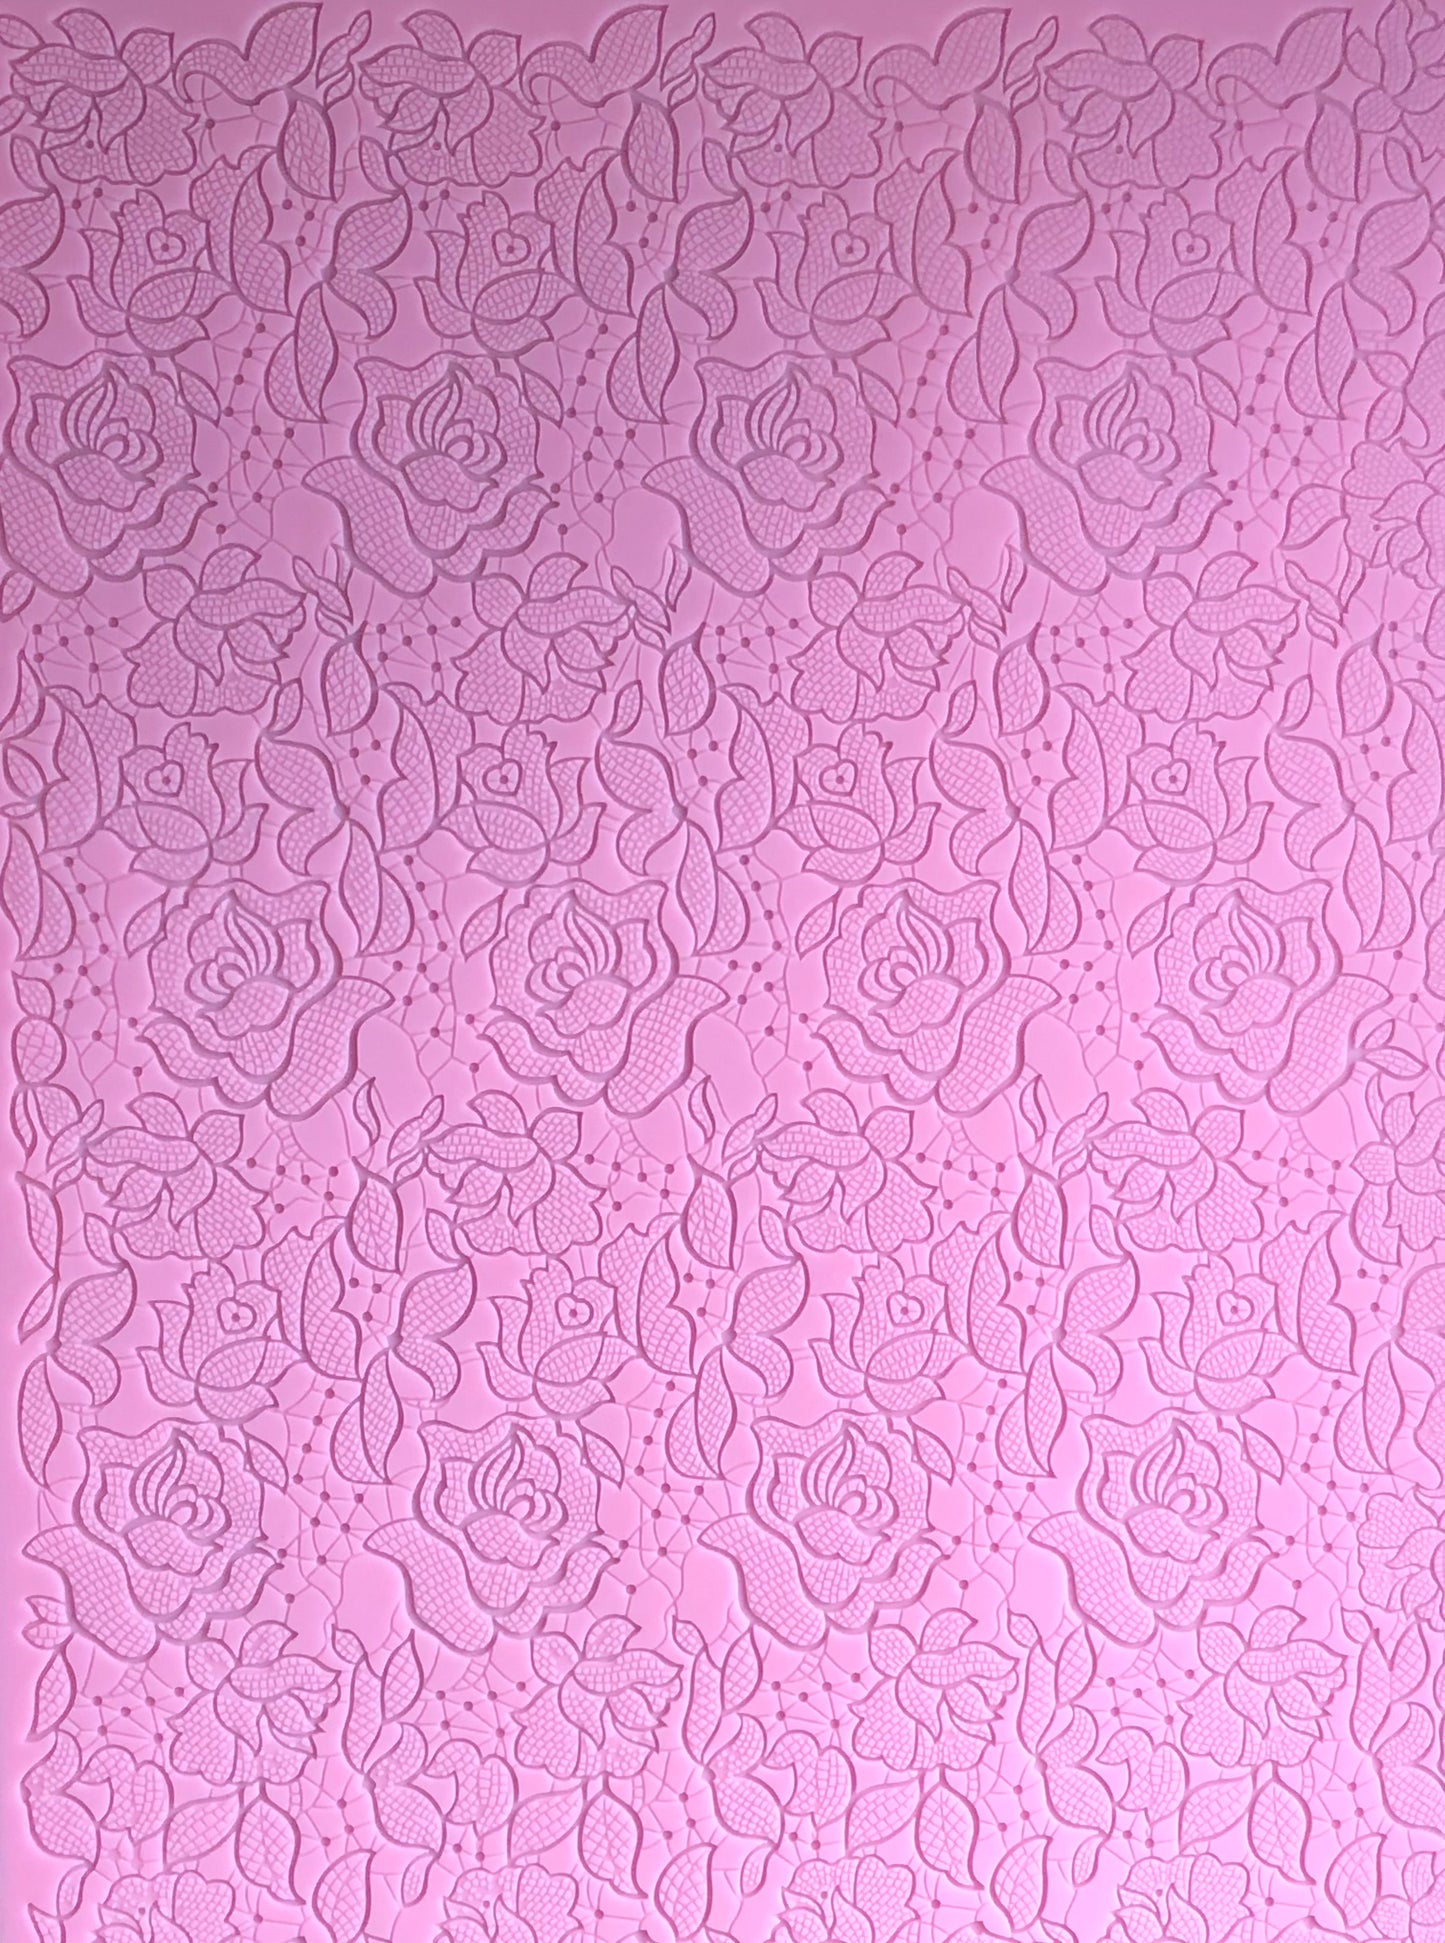 A top view showing the entirety of a textured pink floral design mat.